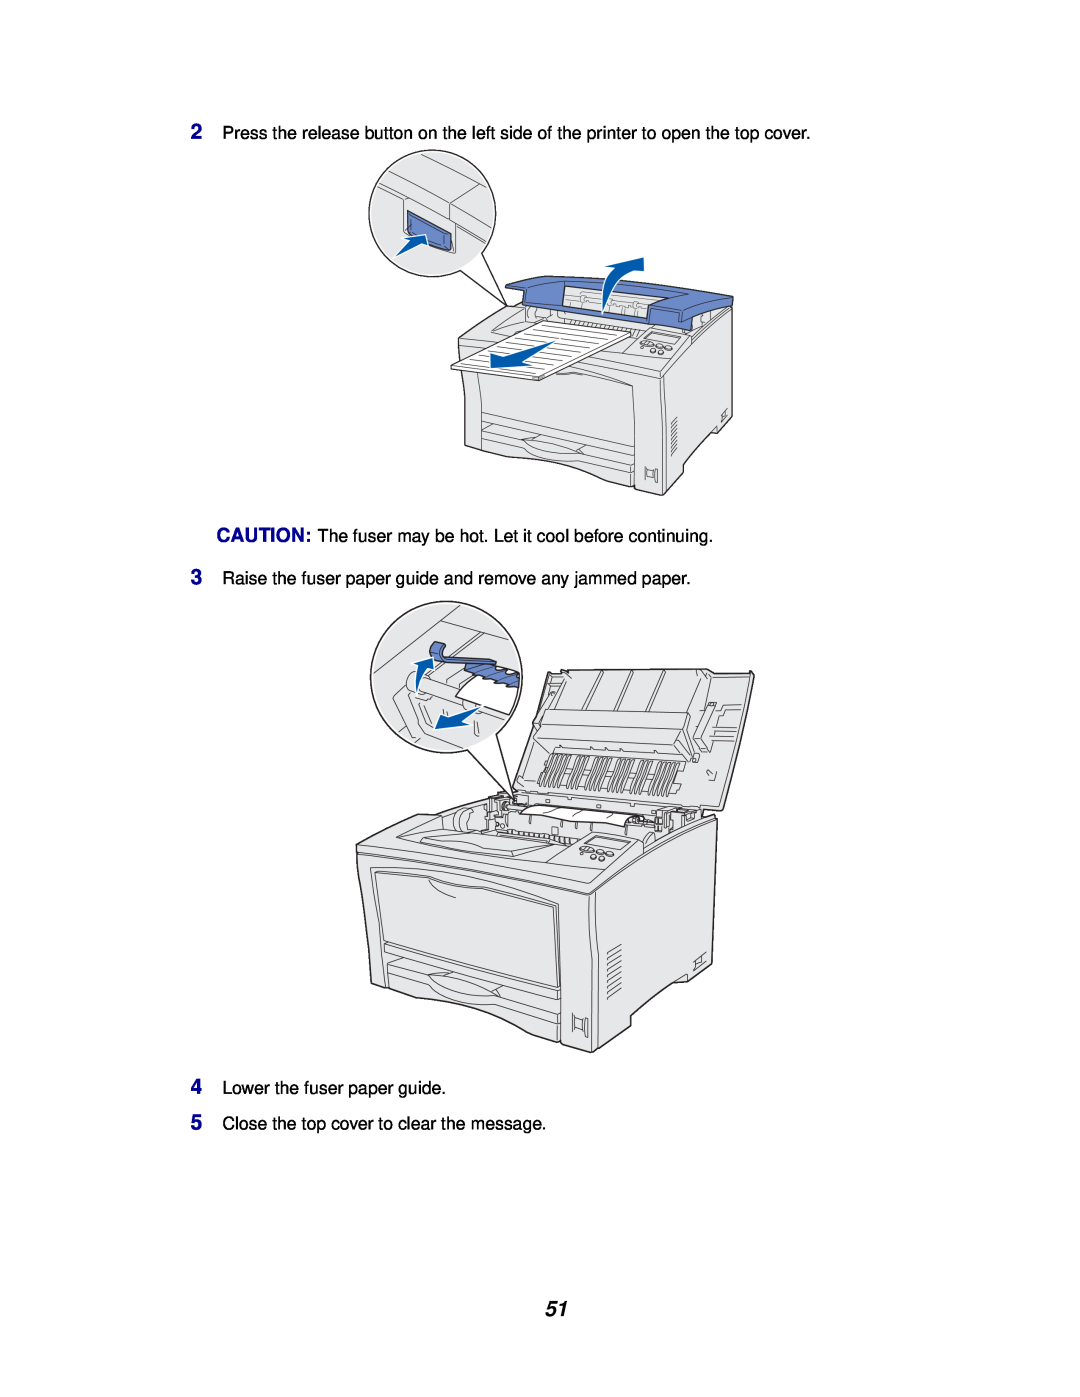 Lexmark 812 manual CAUTION The fuser may be hot. Let it cool before continuing, Lower the fuser paper guide 